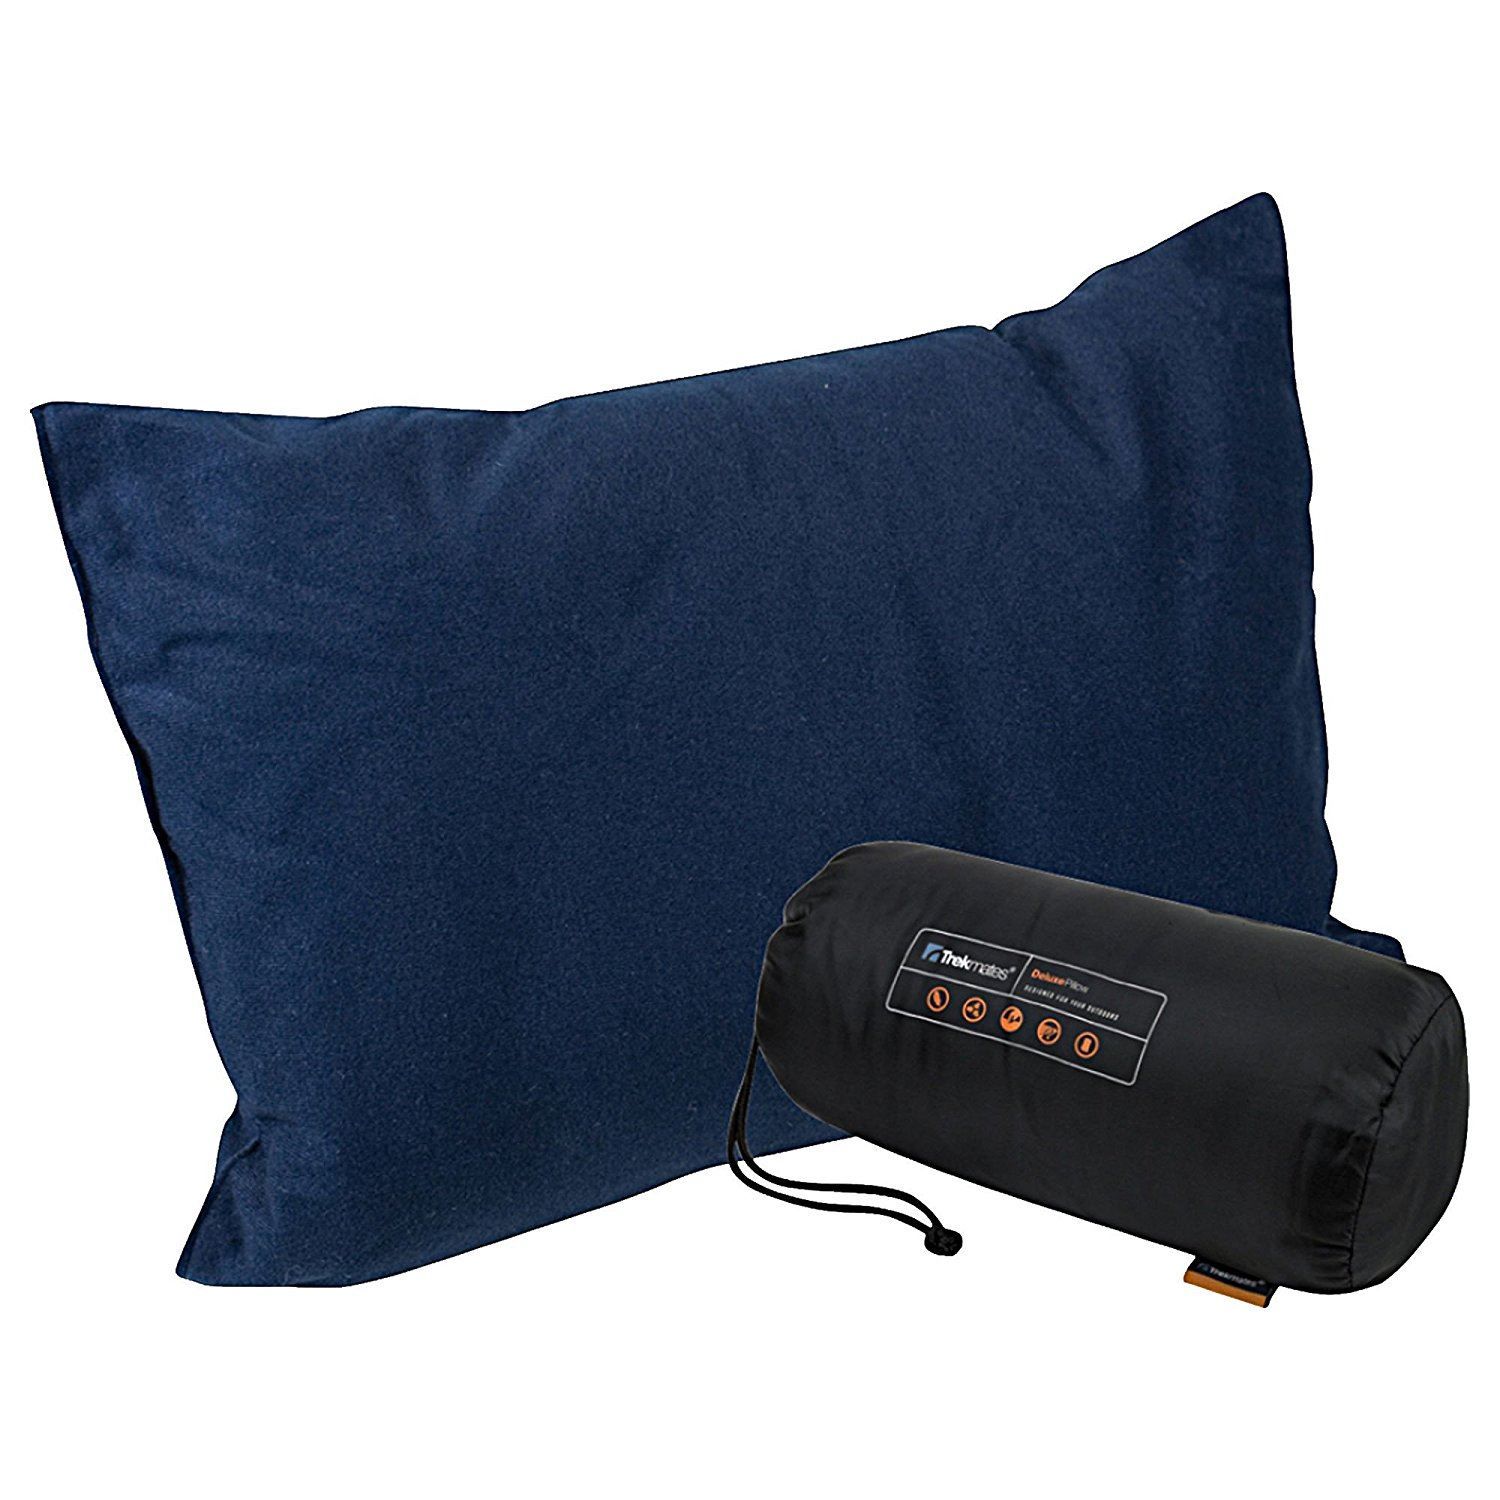 Image of Trekmates Delux Pillow, Navy, O/S